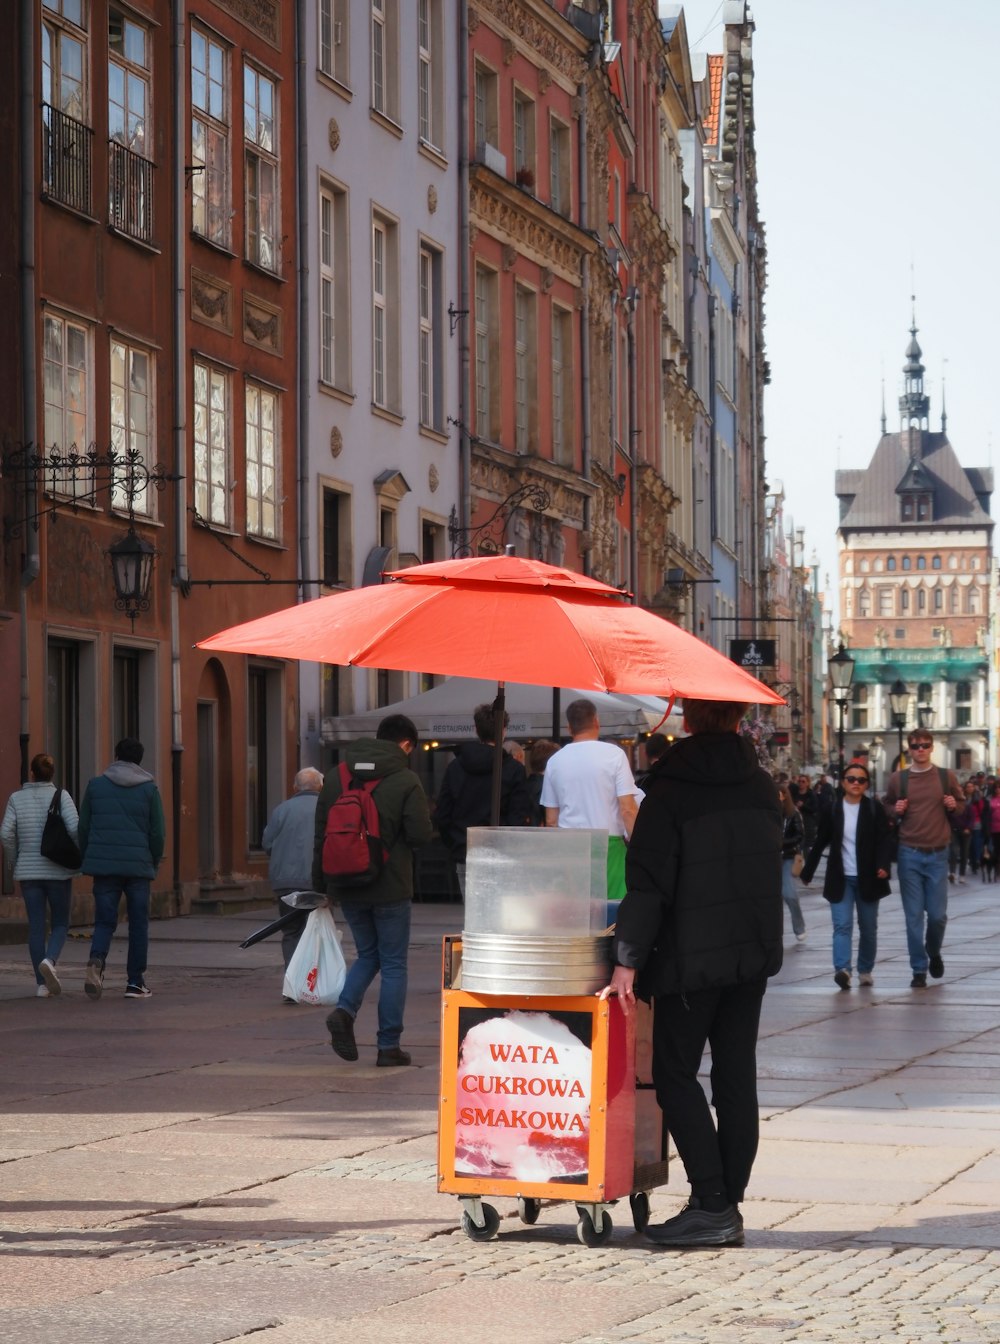 a person with a red umbrella on a city street